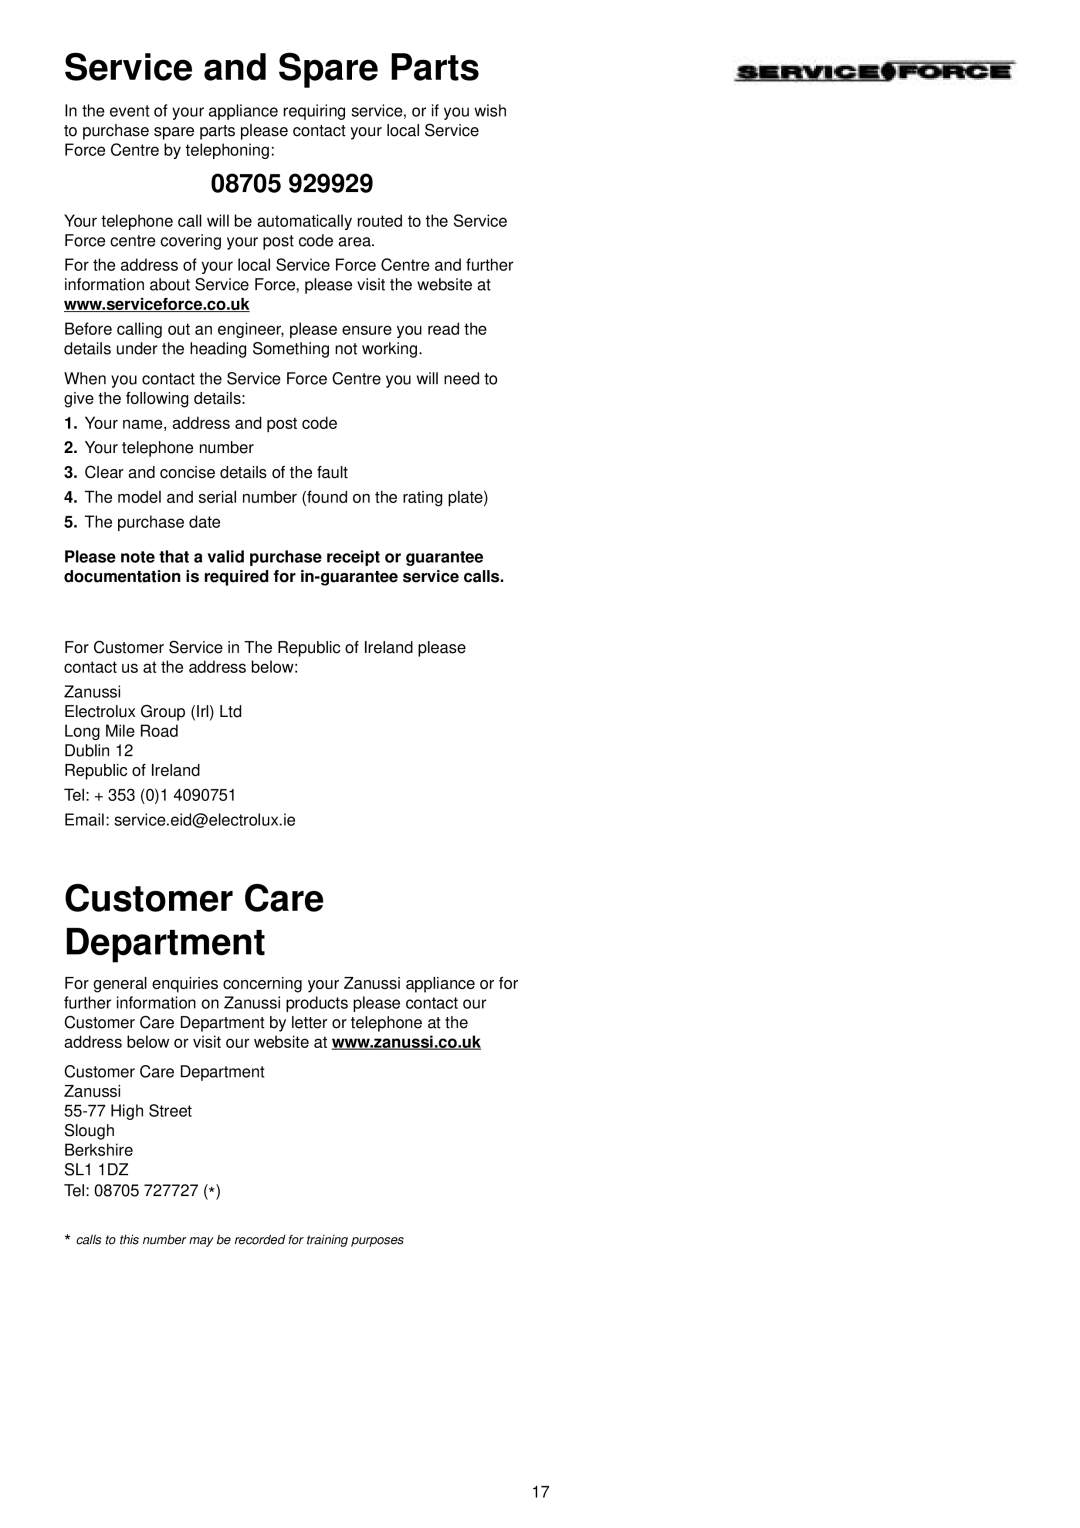 Zanussi ZDT 6255 manual Service and Spare Parts, Customer Care Department, 08705 